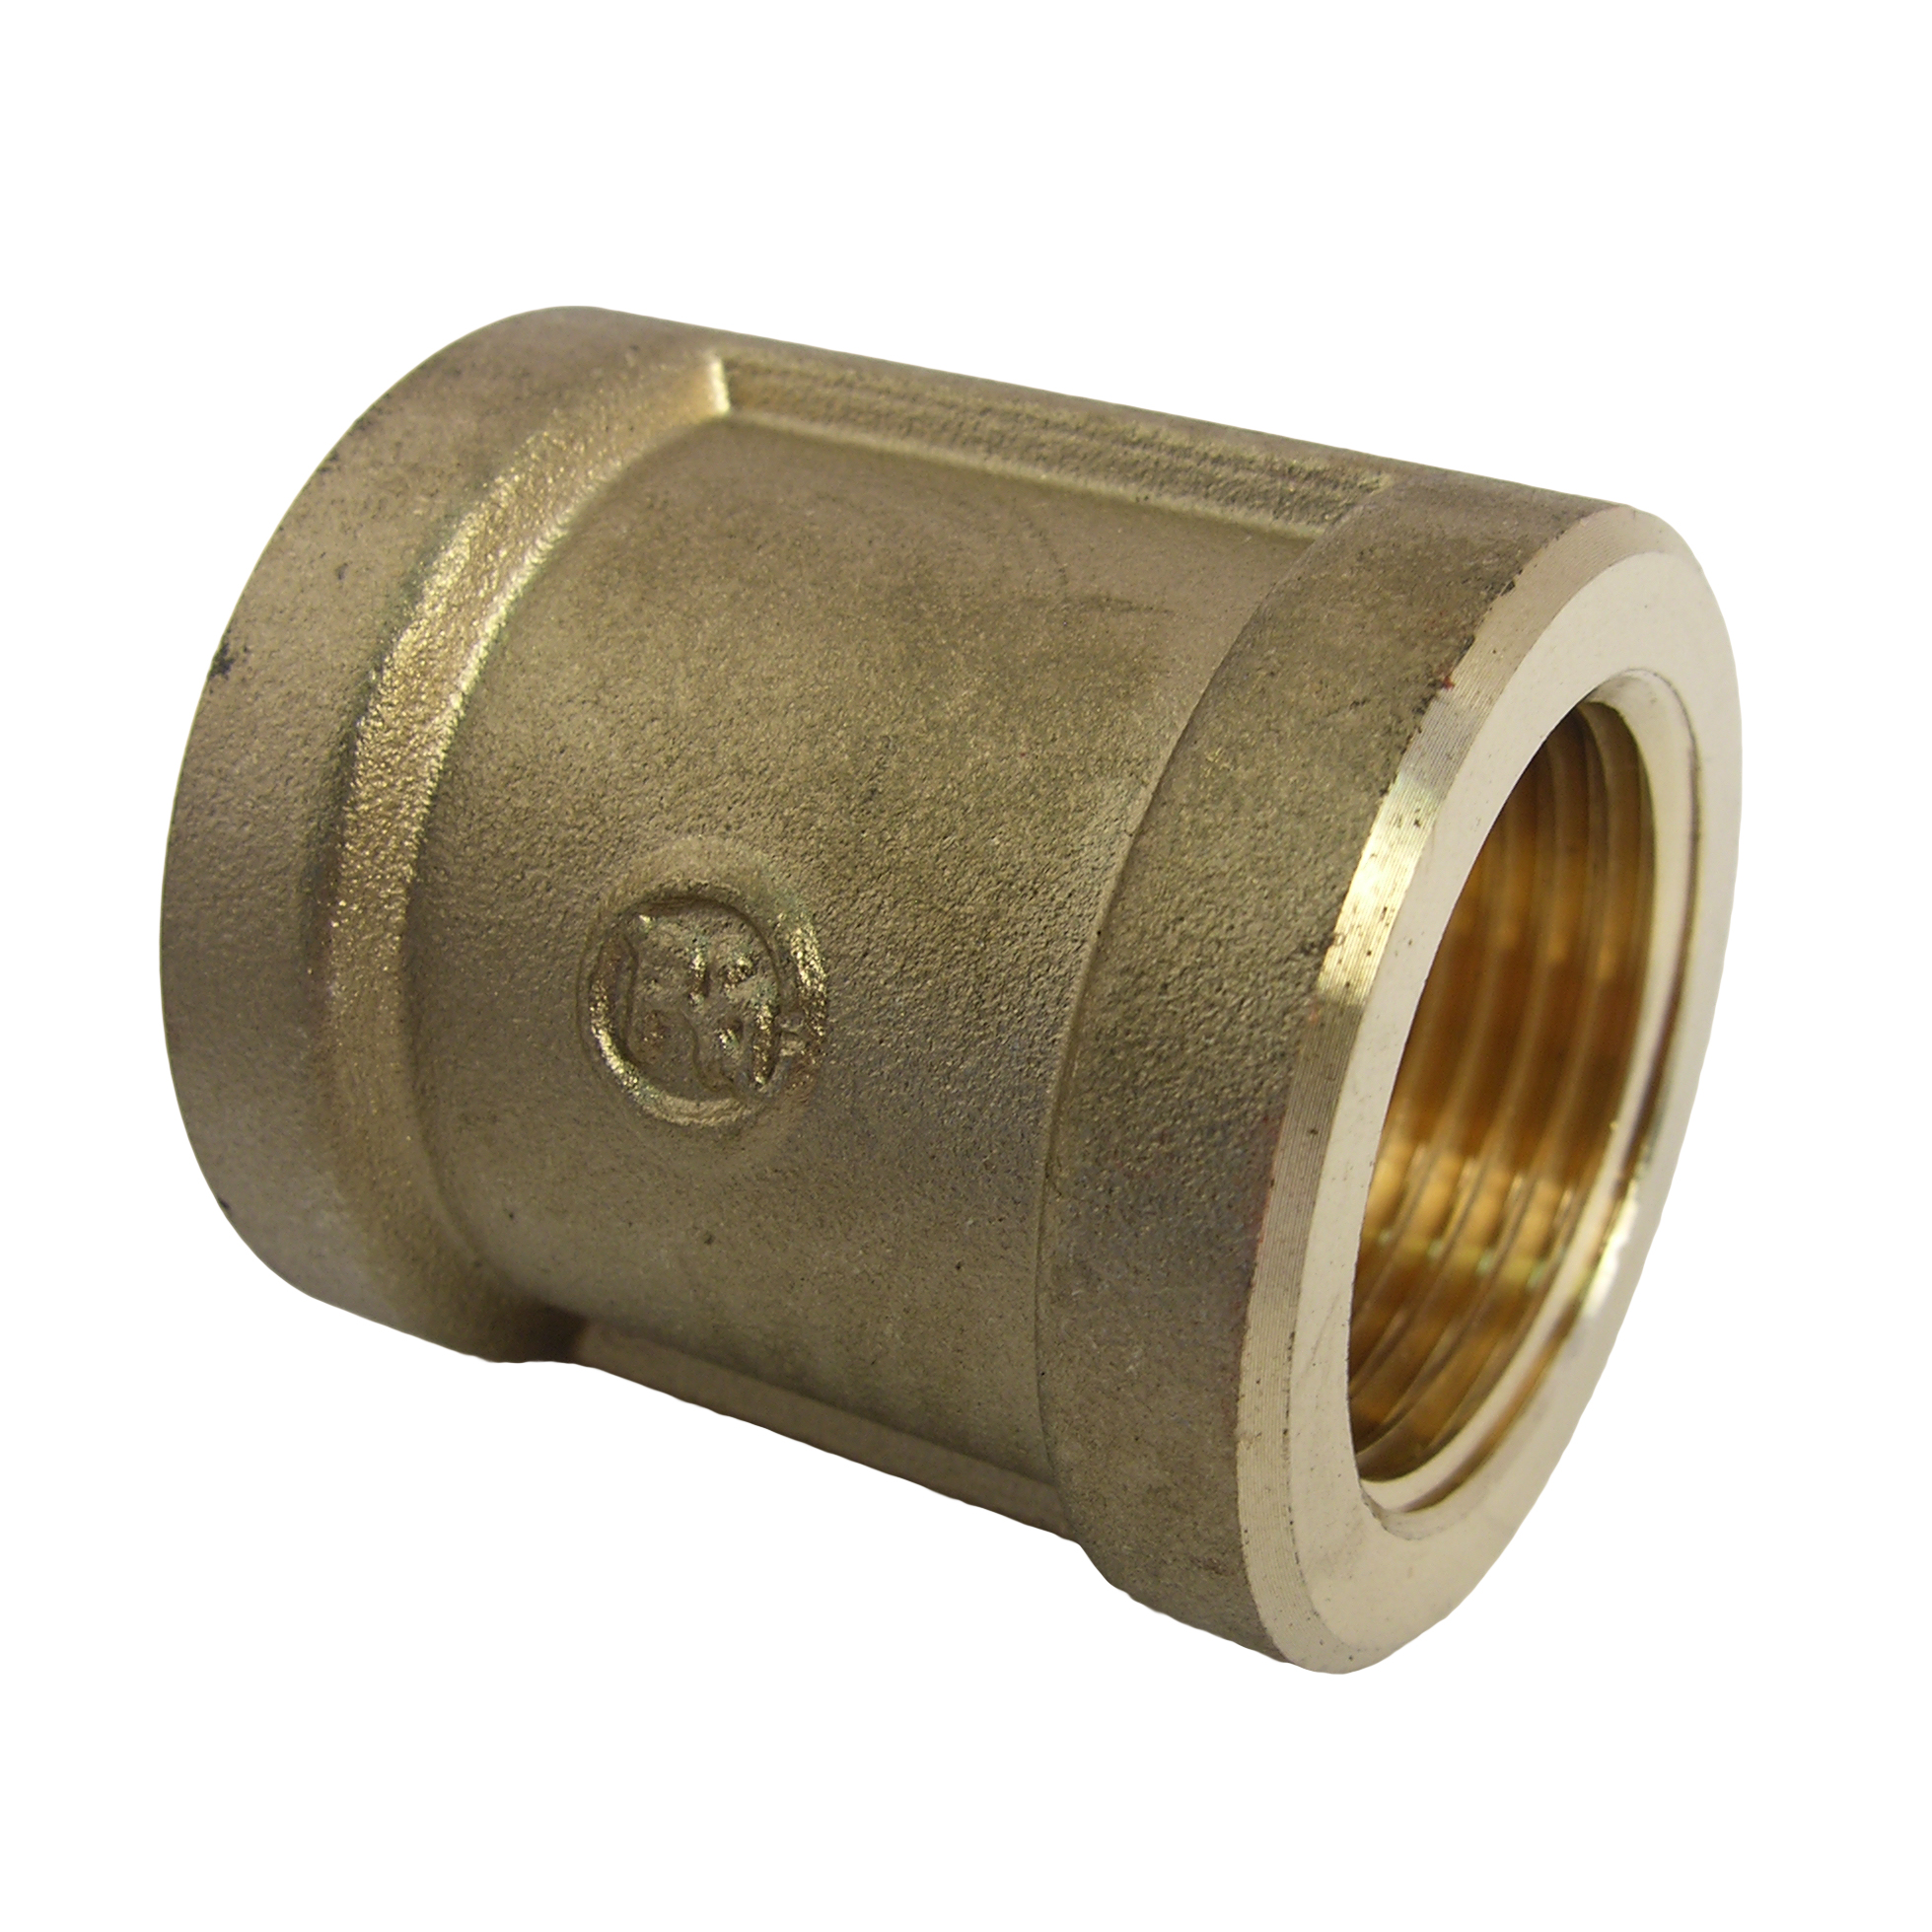 Lasco 17-9229 Pipe Coupling, 3/4 in, FPT, Brass